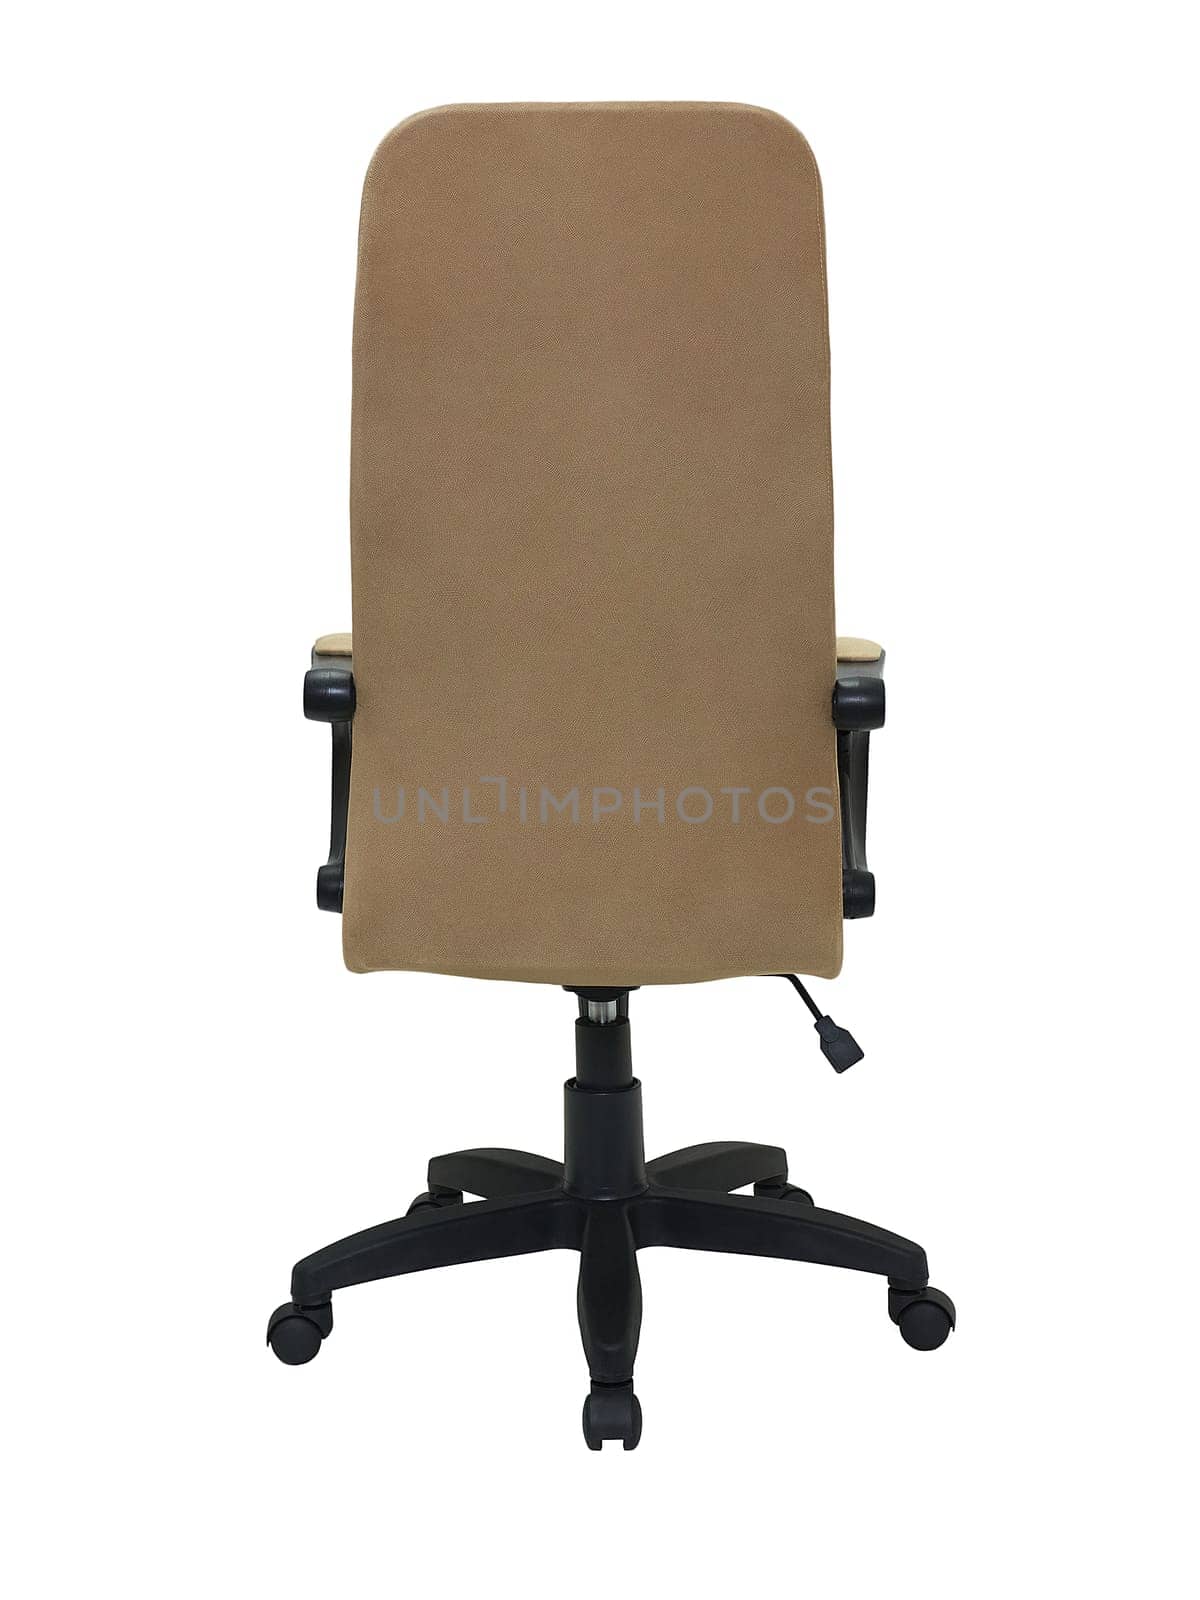 beige fabric armchair on wheels isolated on white background, back view. modern furniture in minimal style, interior, home design